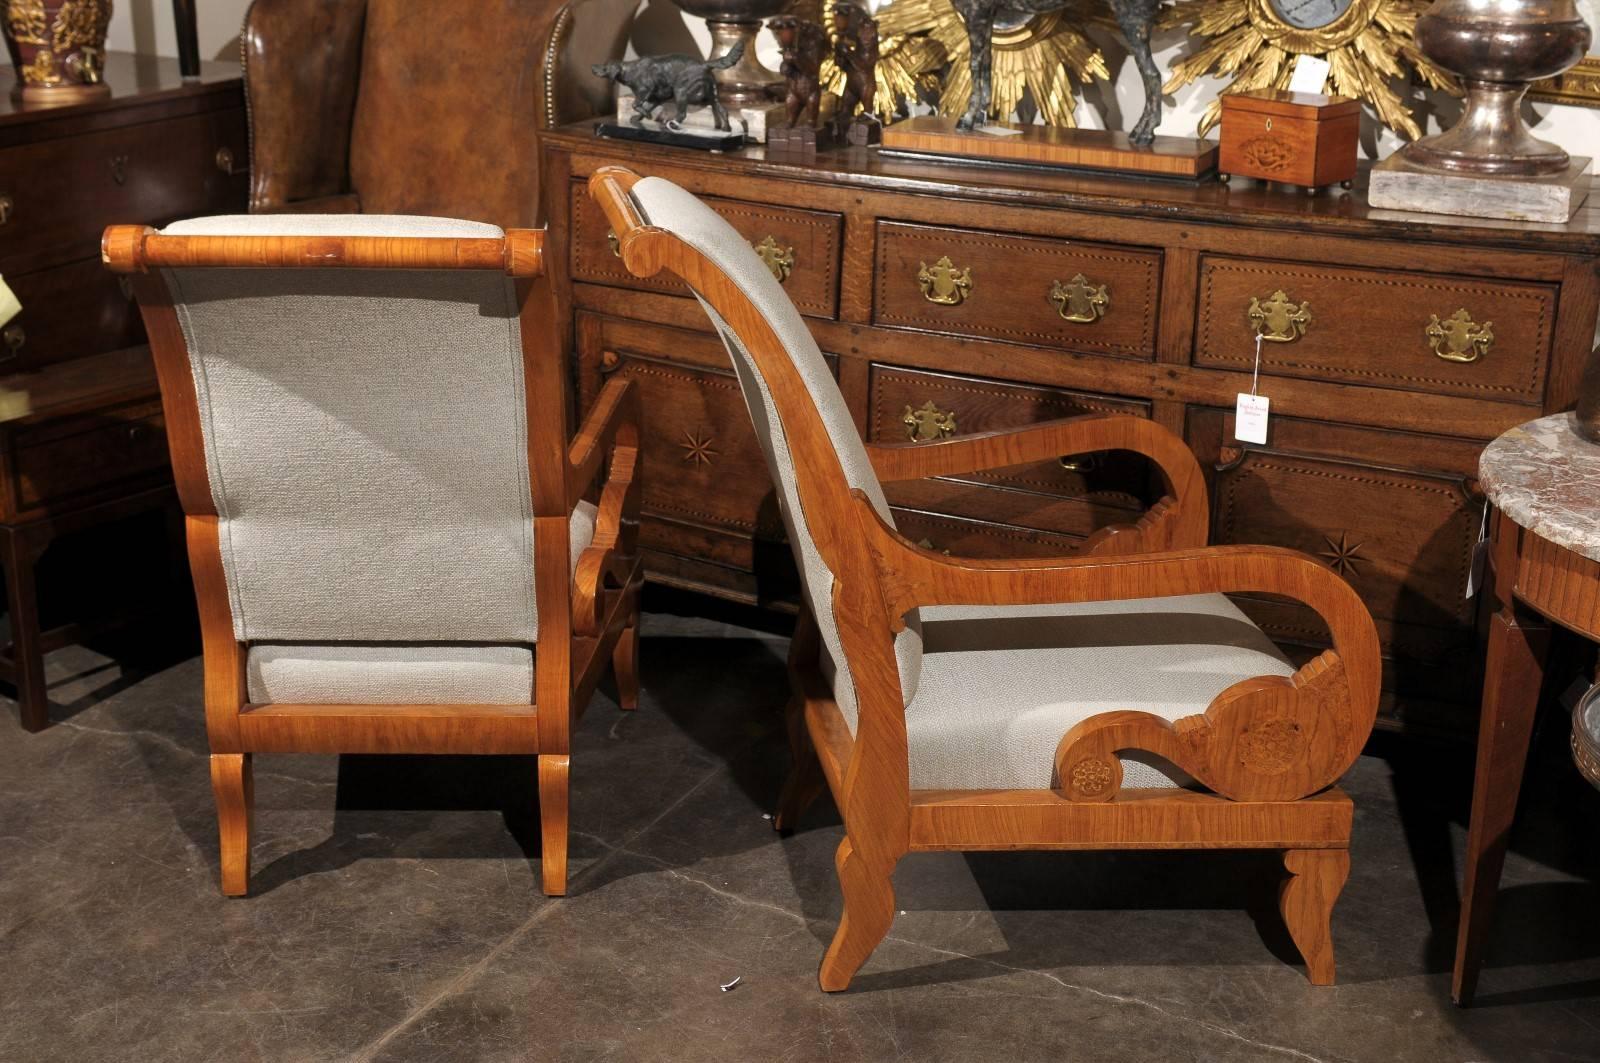 Pair of Biedermeier Mid 19th Century Austrian Armchairs with Scrolled Arms For Sale 3